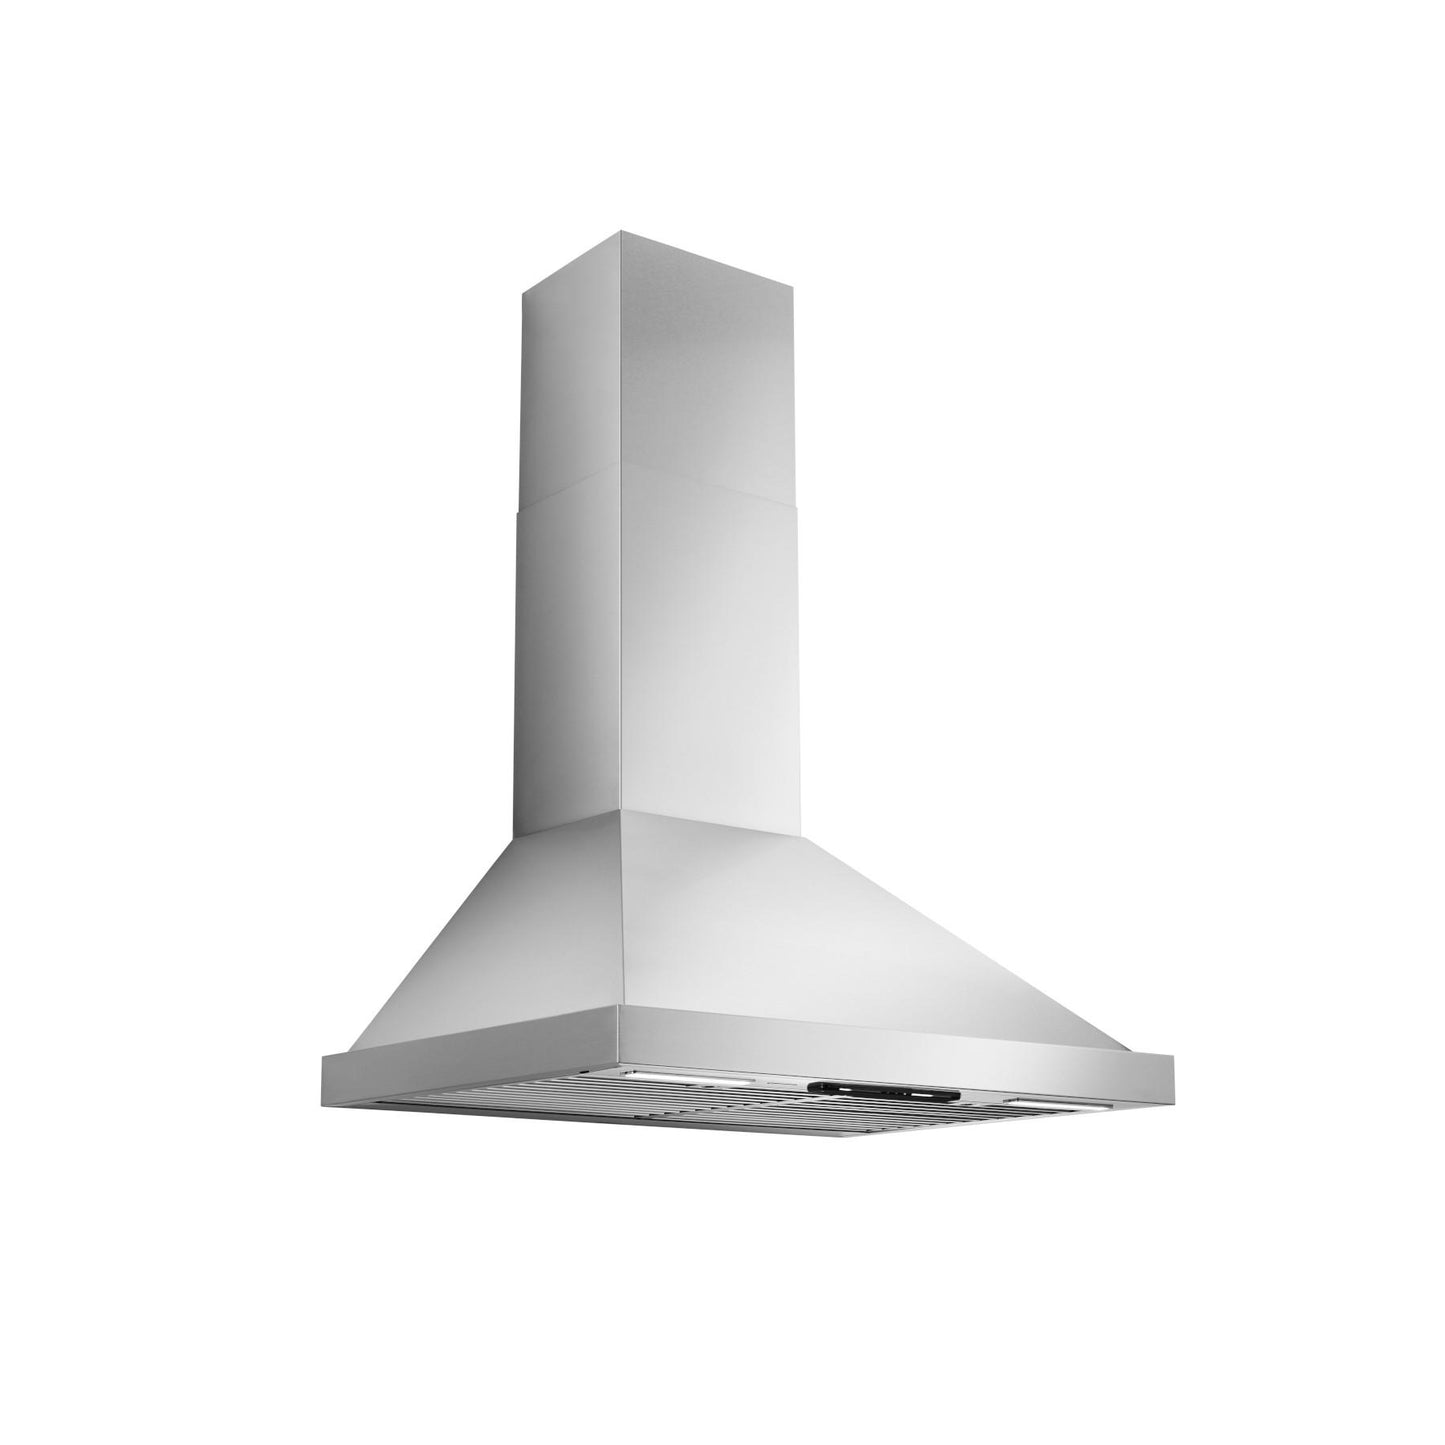 Best Range Hoods WCP1366SS 36-Inch Wall Mount Chimney Hood W/ Smartsense® And Voice Control, 650 Max Blower Cfm, Stainless Steel (Wcp1 Series)